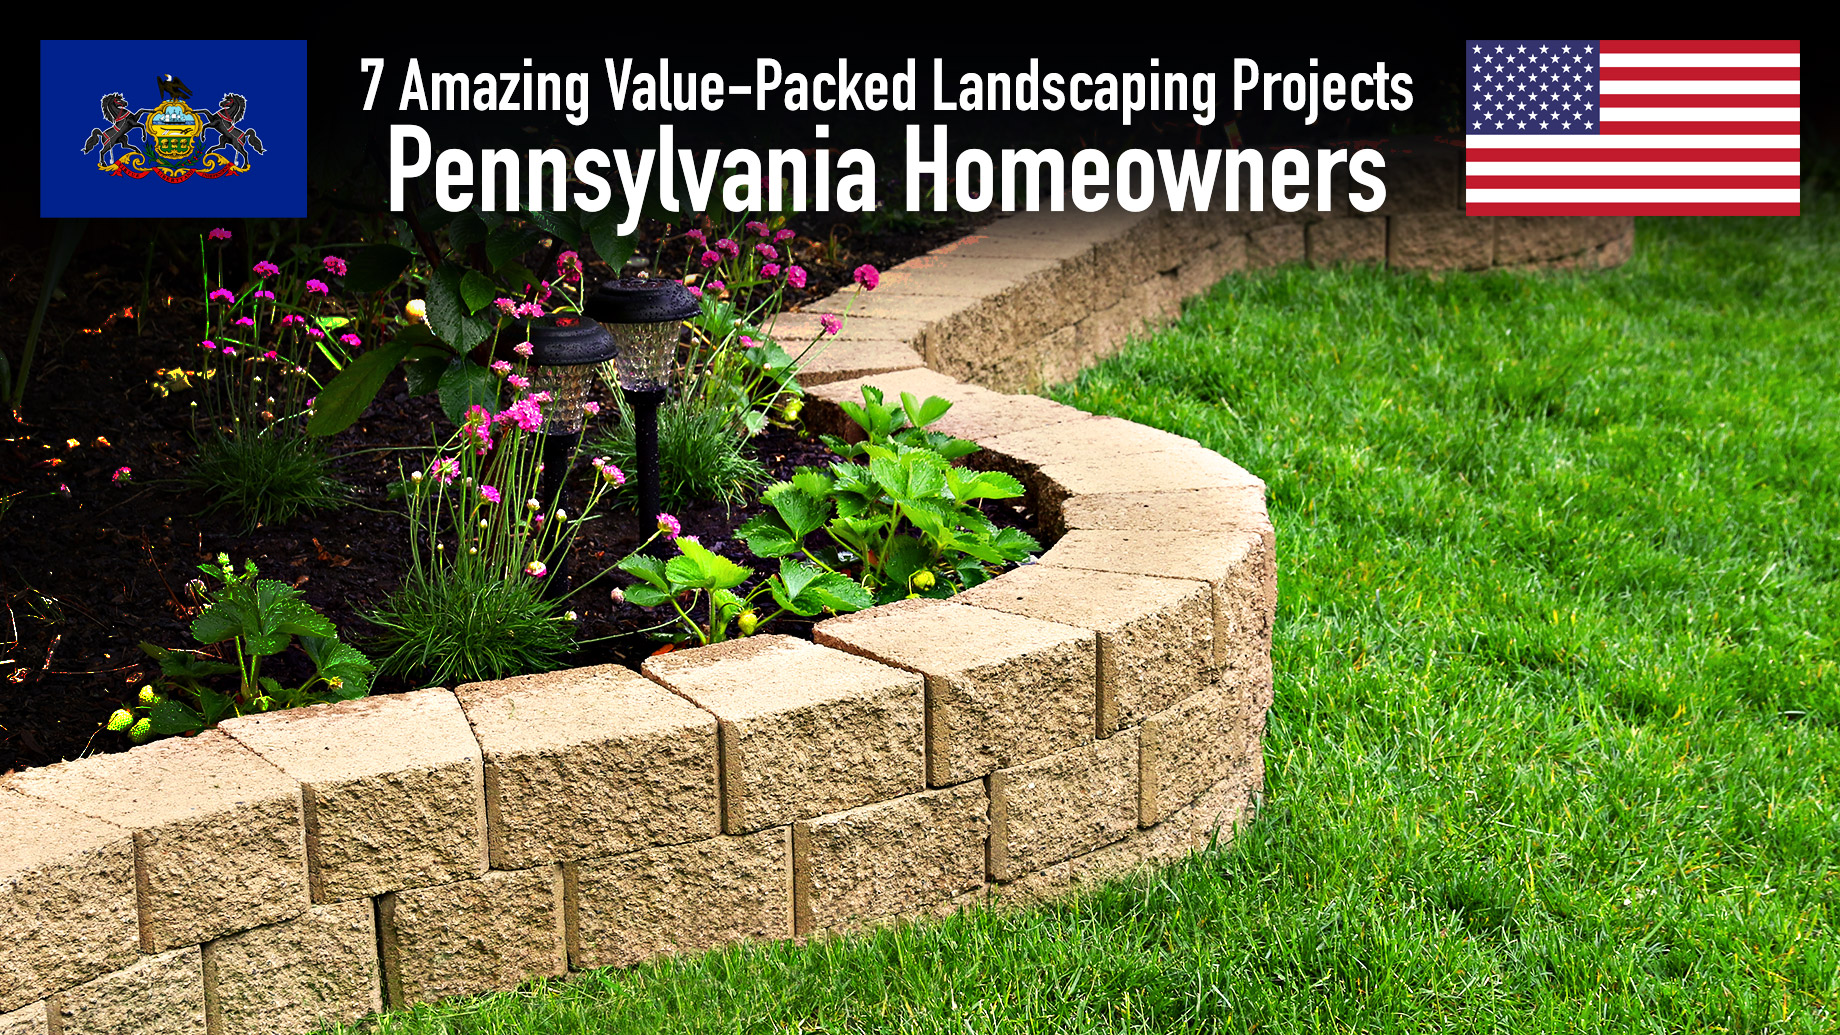 7 Amazing Value-Packed Landscaping Projects For Pennsylvania Homeowners